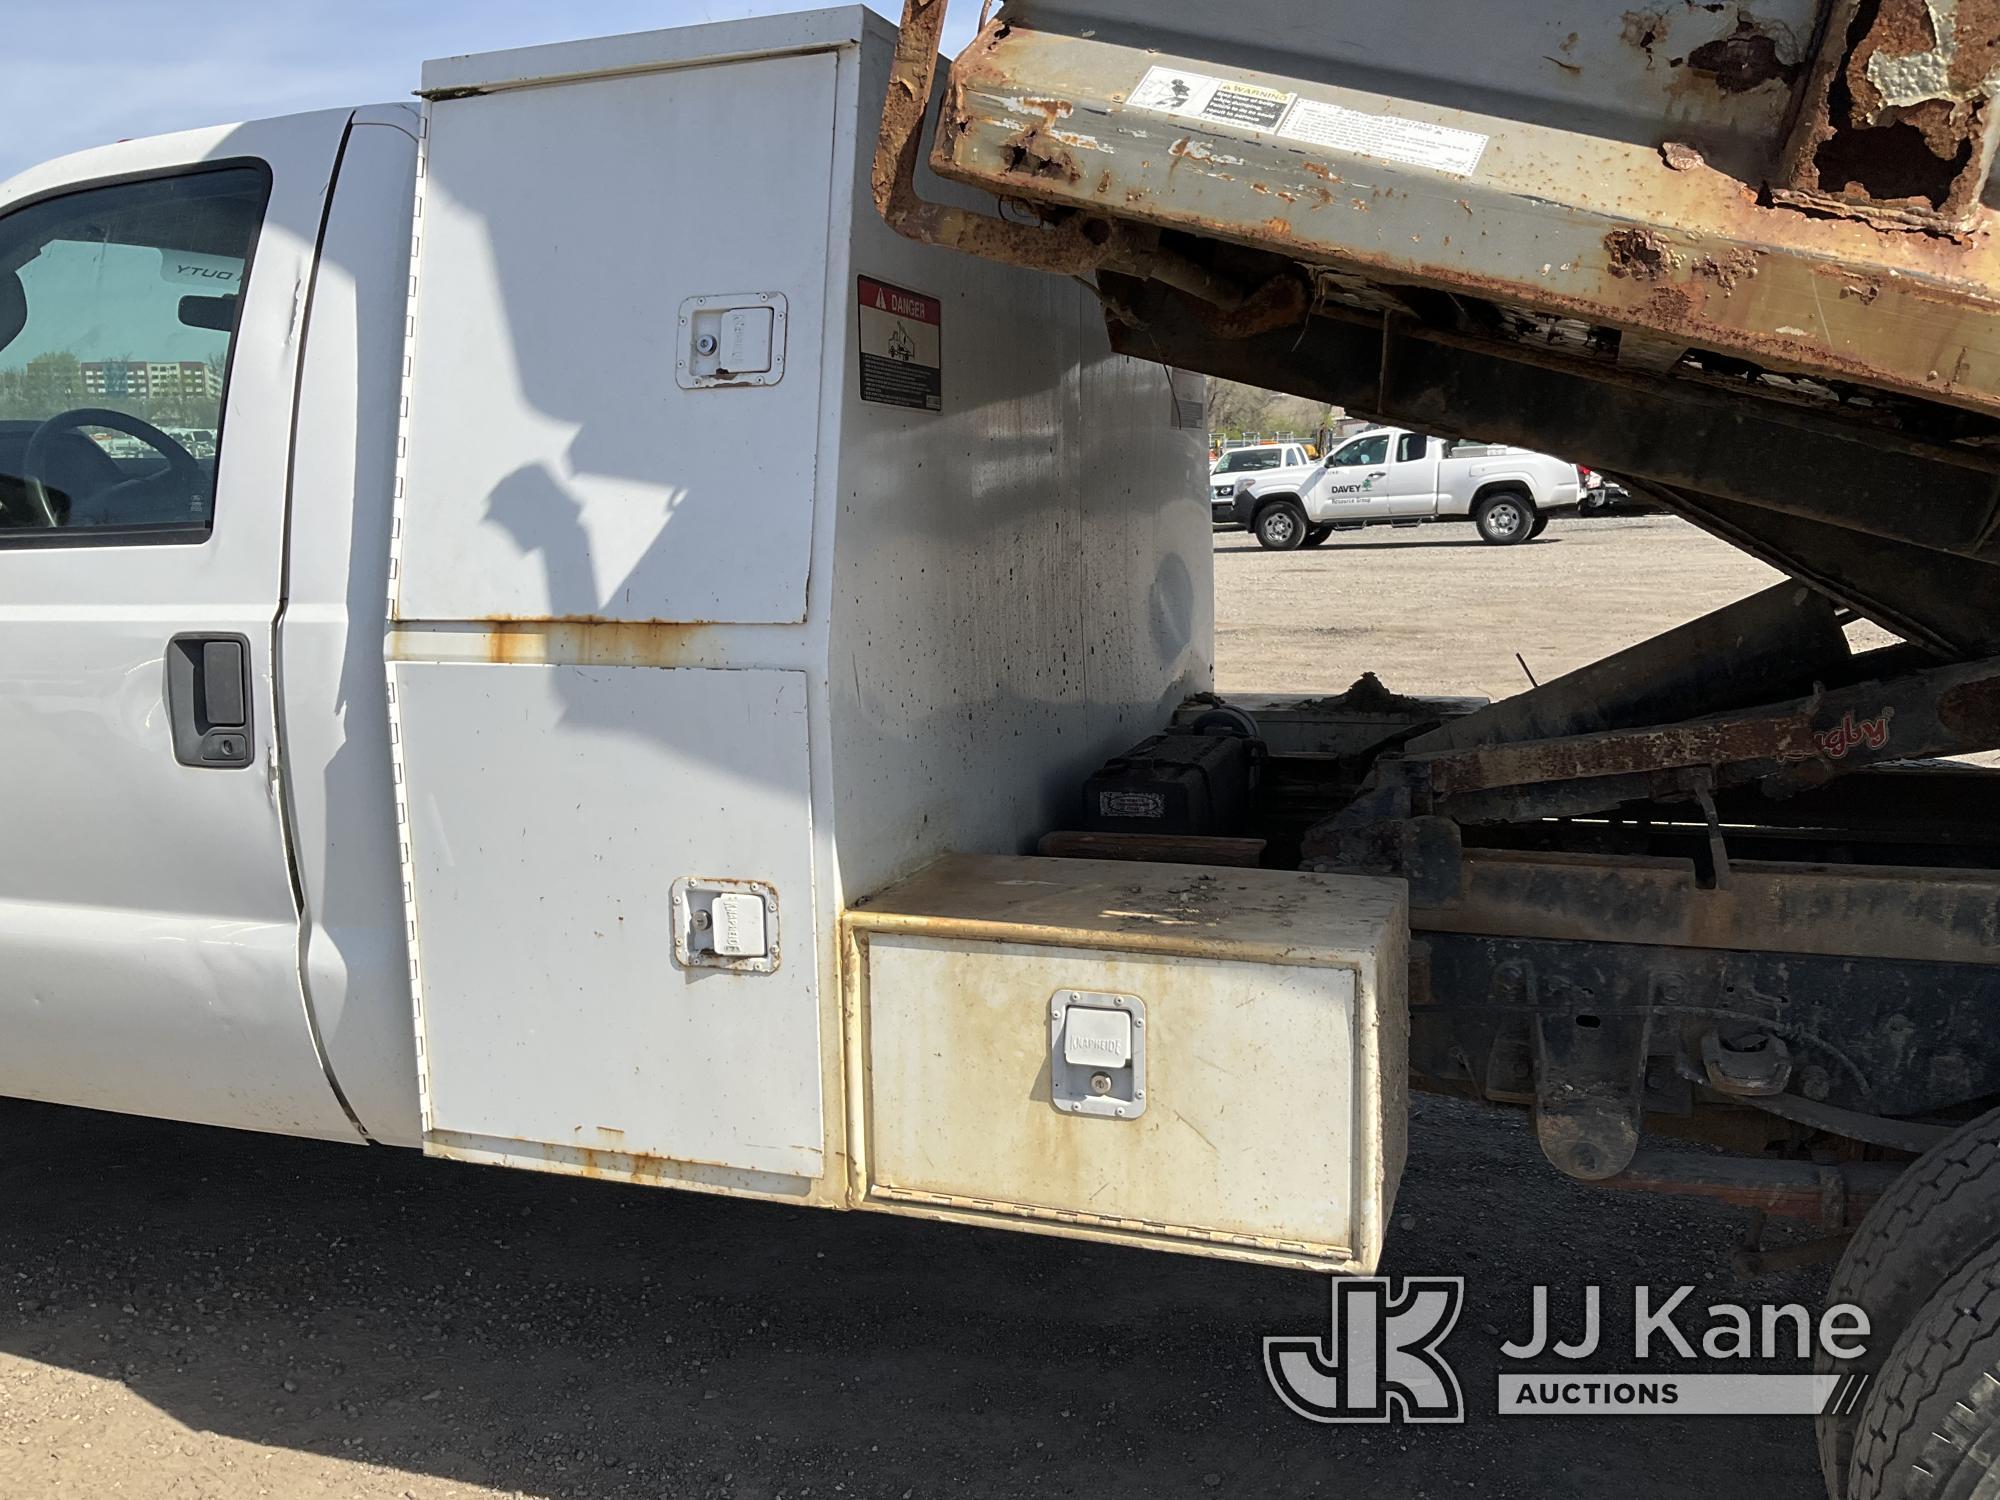 (Plymouth Meeting, PA) 2008 Ford F450 4x4 Dump Truck Runs Moves & Dump Operates, Body & Rust Damage,